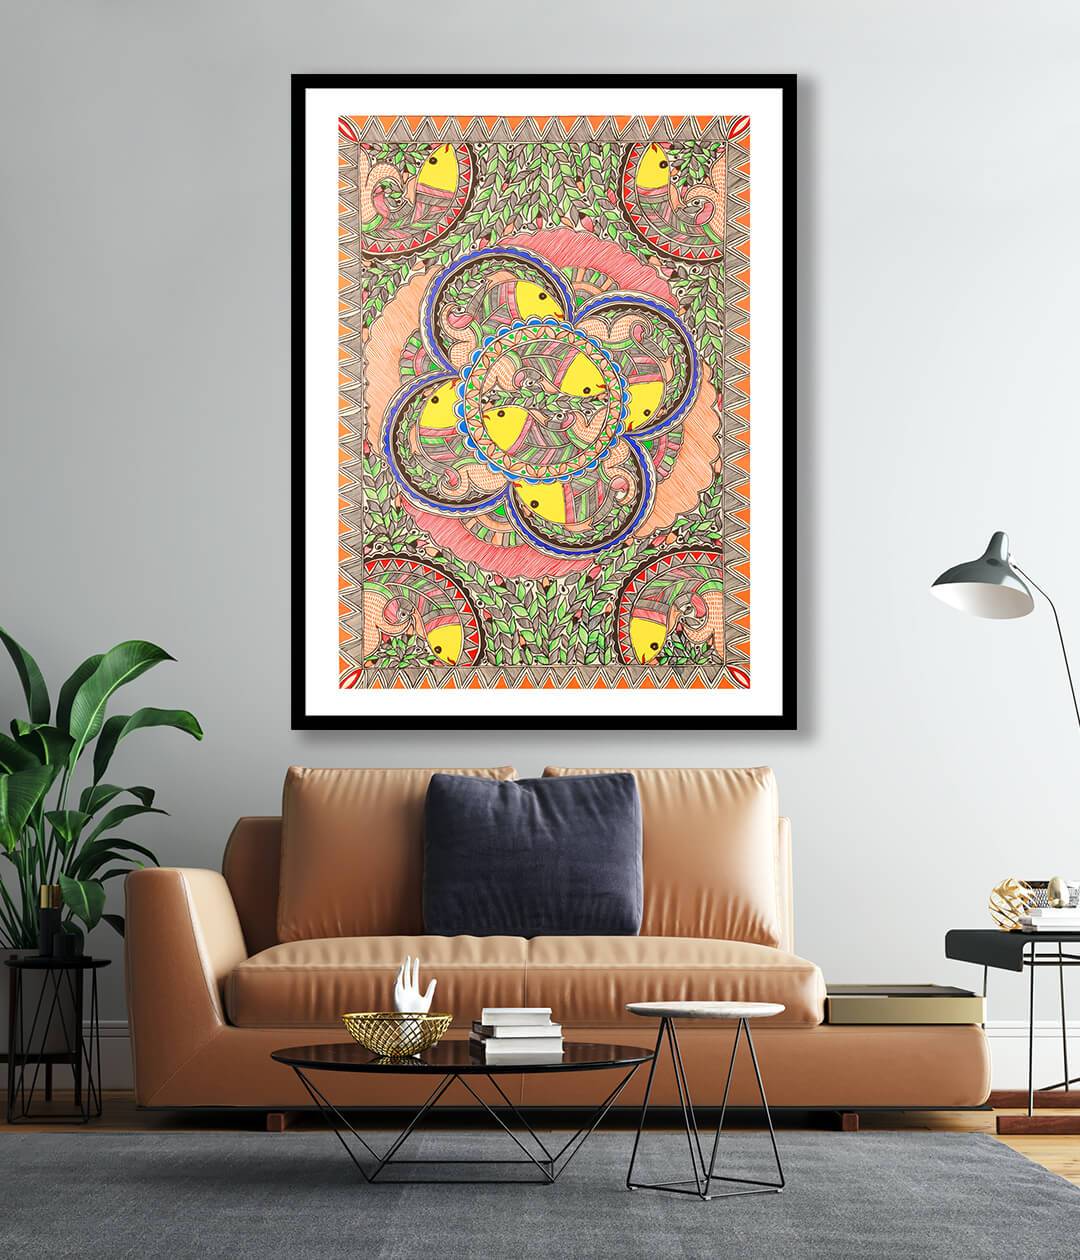 Fishes of prosperity Madhubani Art Painting For Home Wall Art Decor